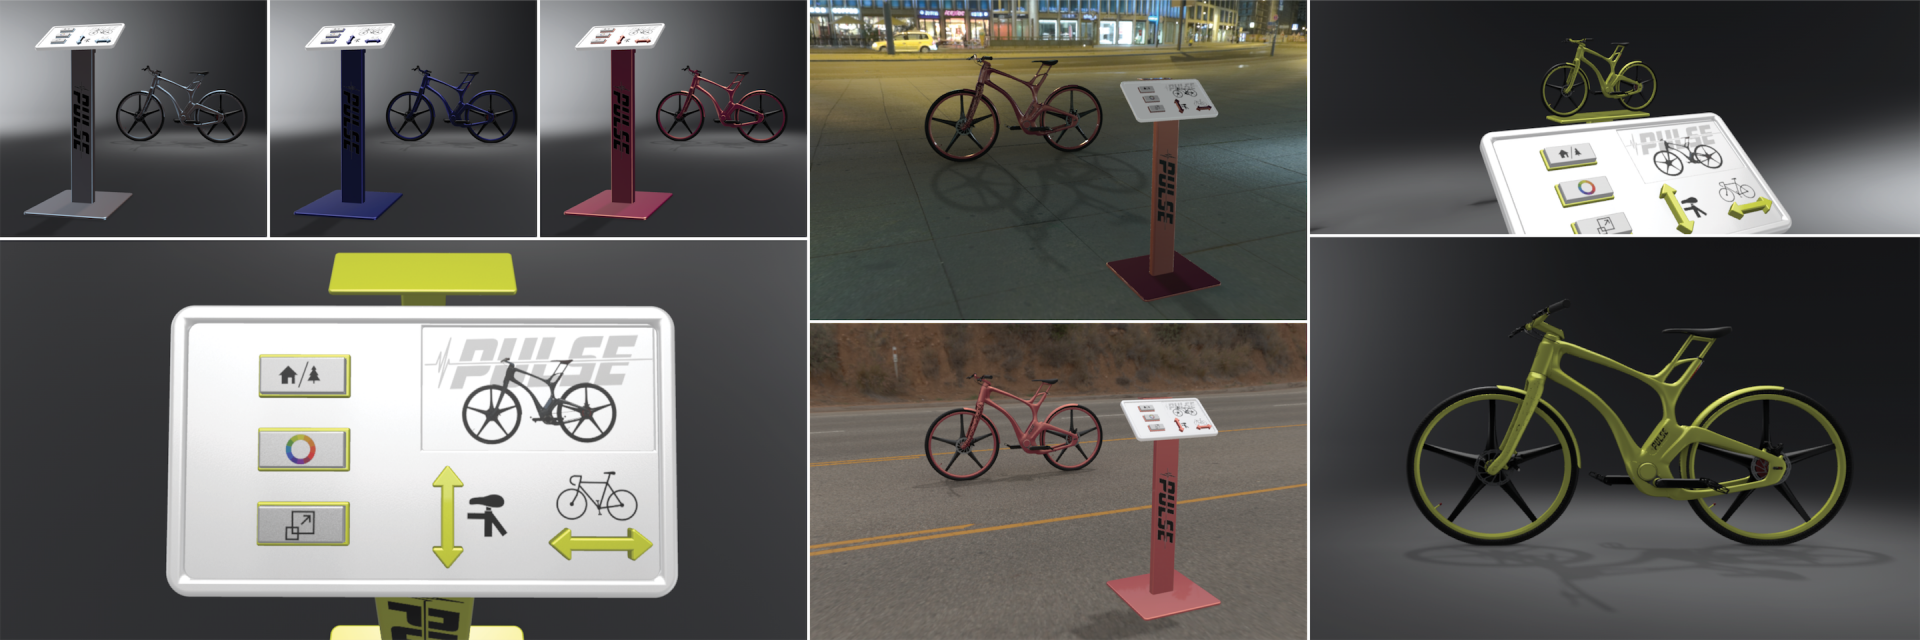 Images of a virtual reality bike shop and street.